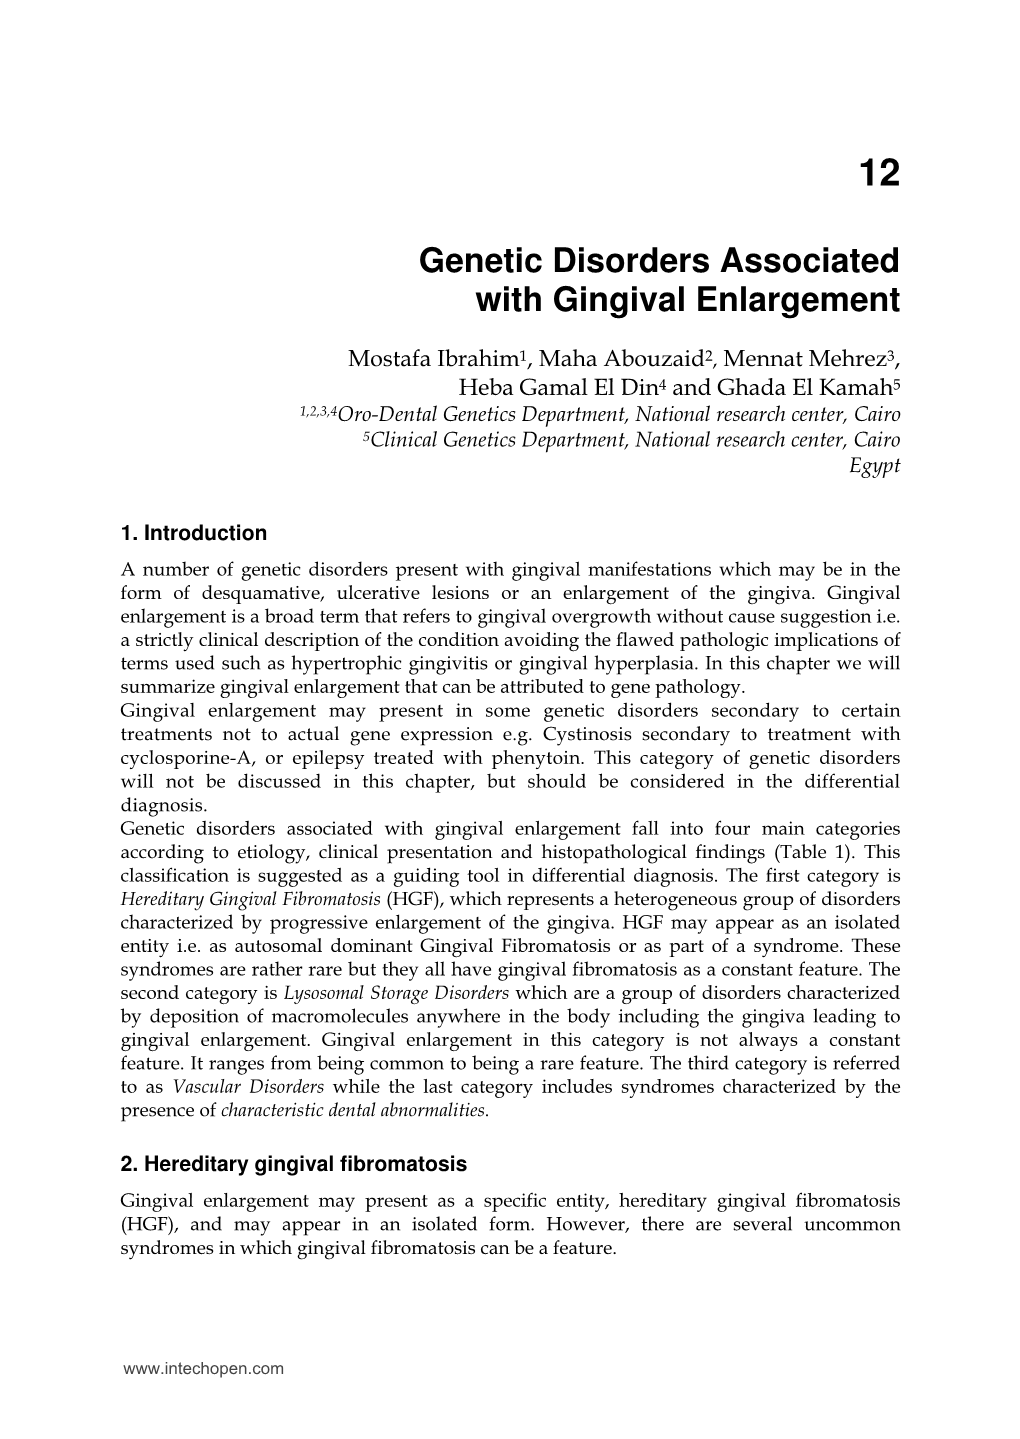 Genetic Disorders Associated with Gingival Enlargement